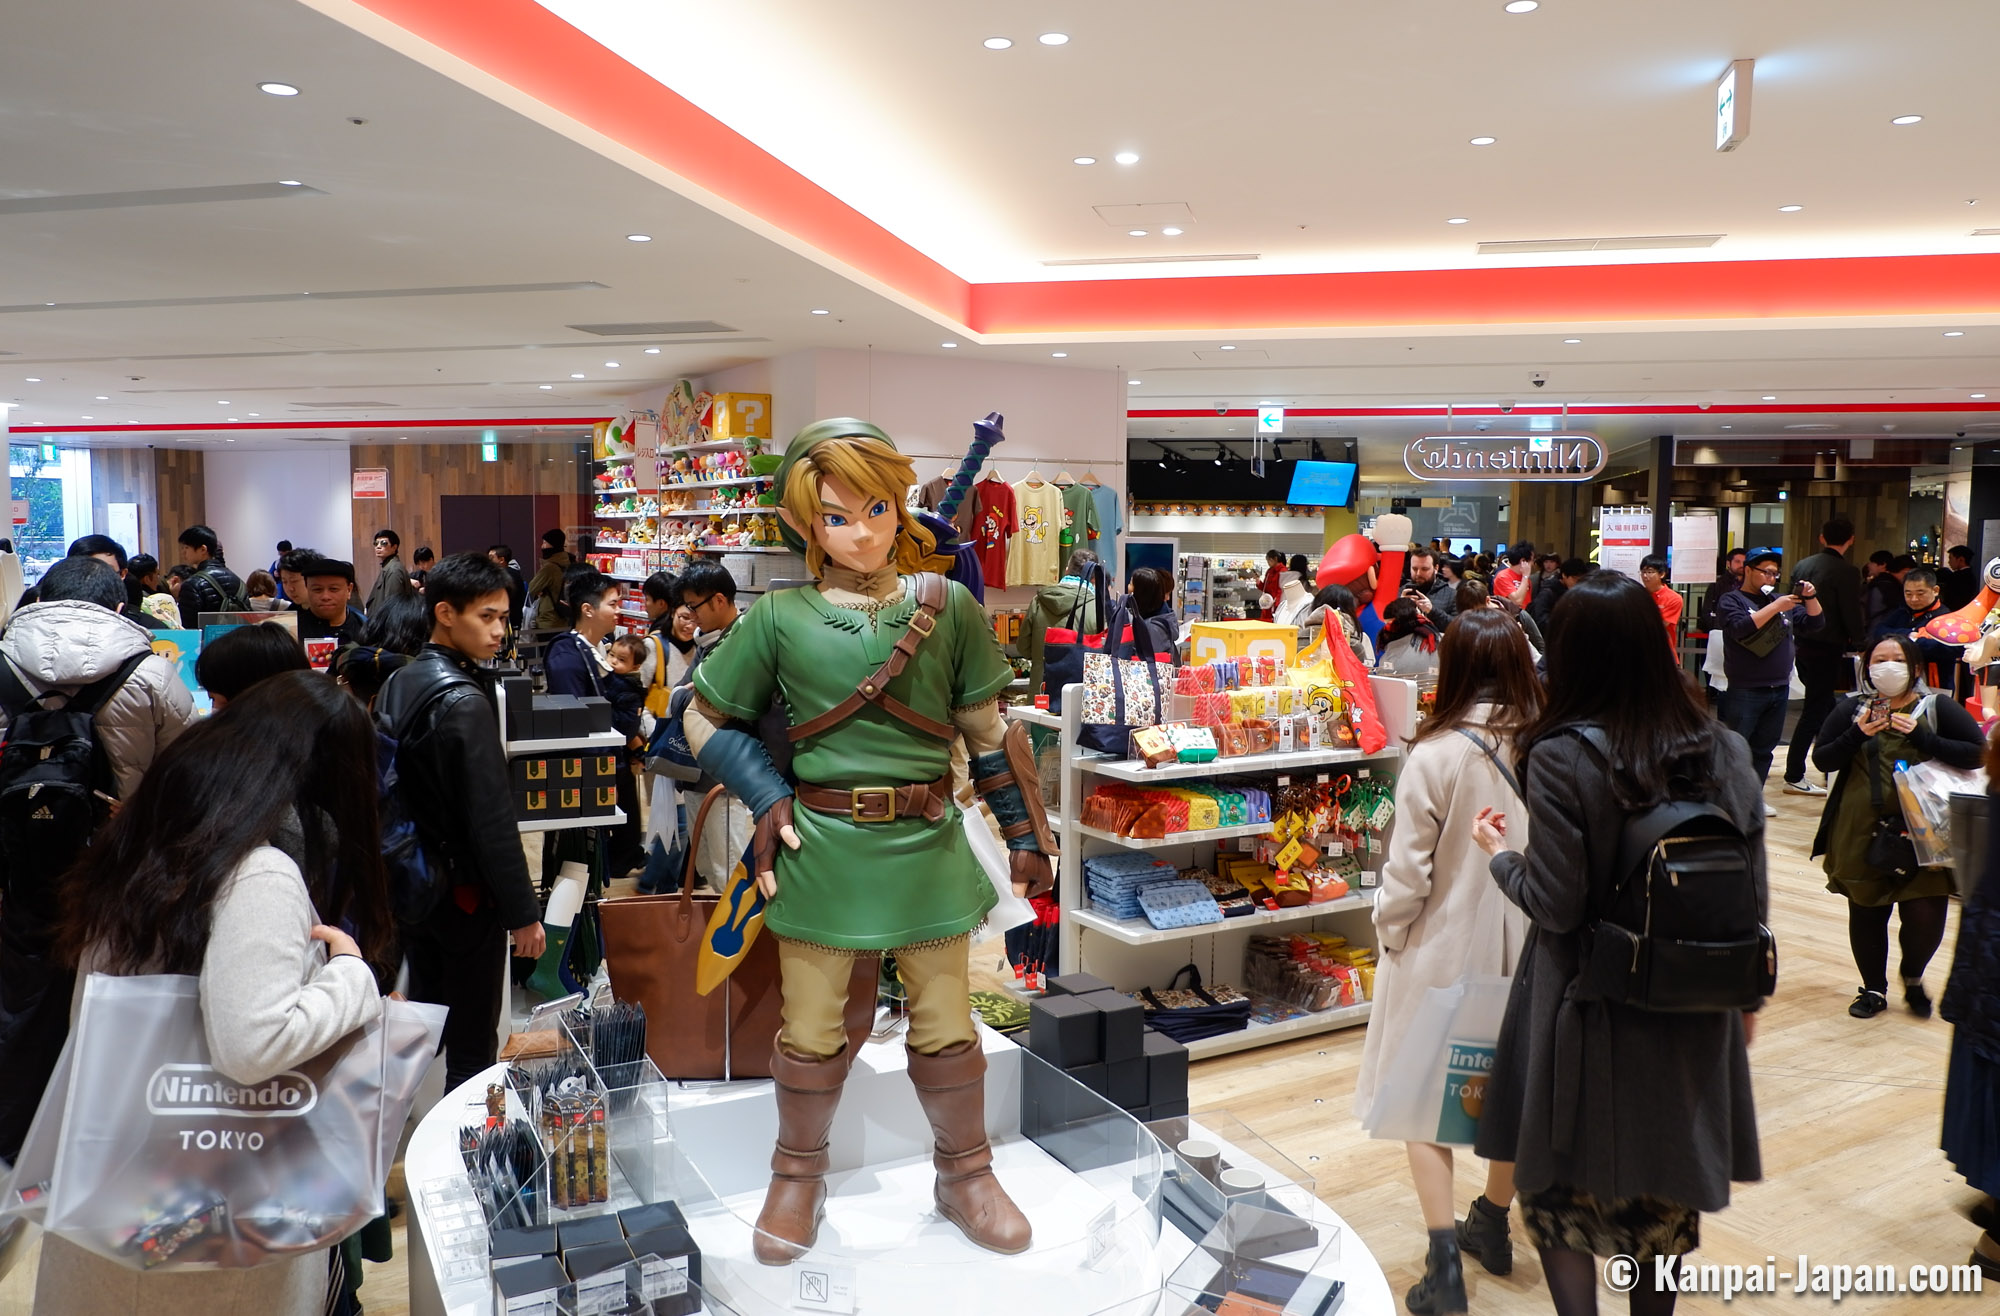 Sociale Studier relæ Dam Shibuya PARCO - The First Official Nintendo Store in Japan